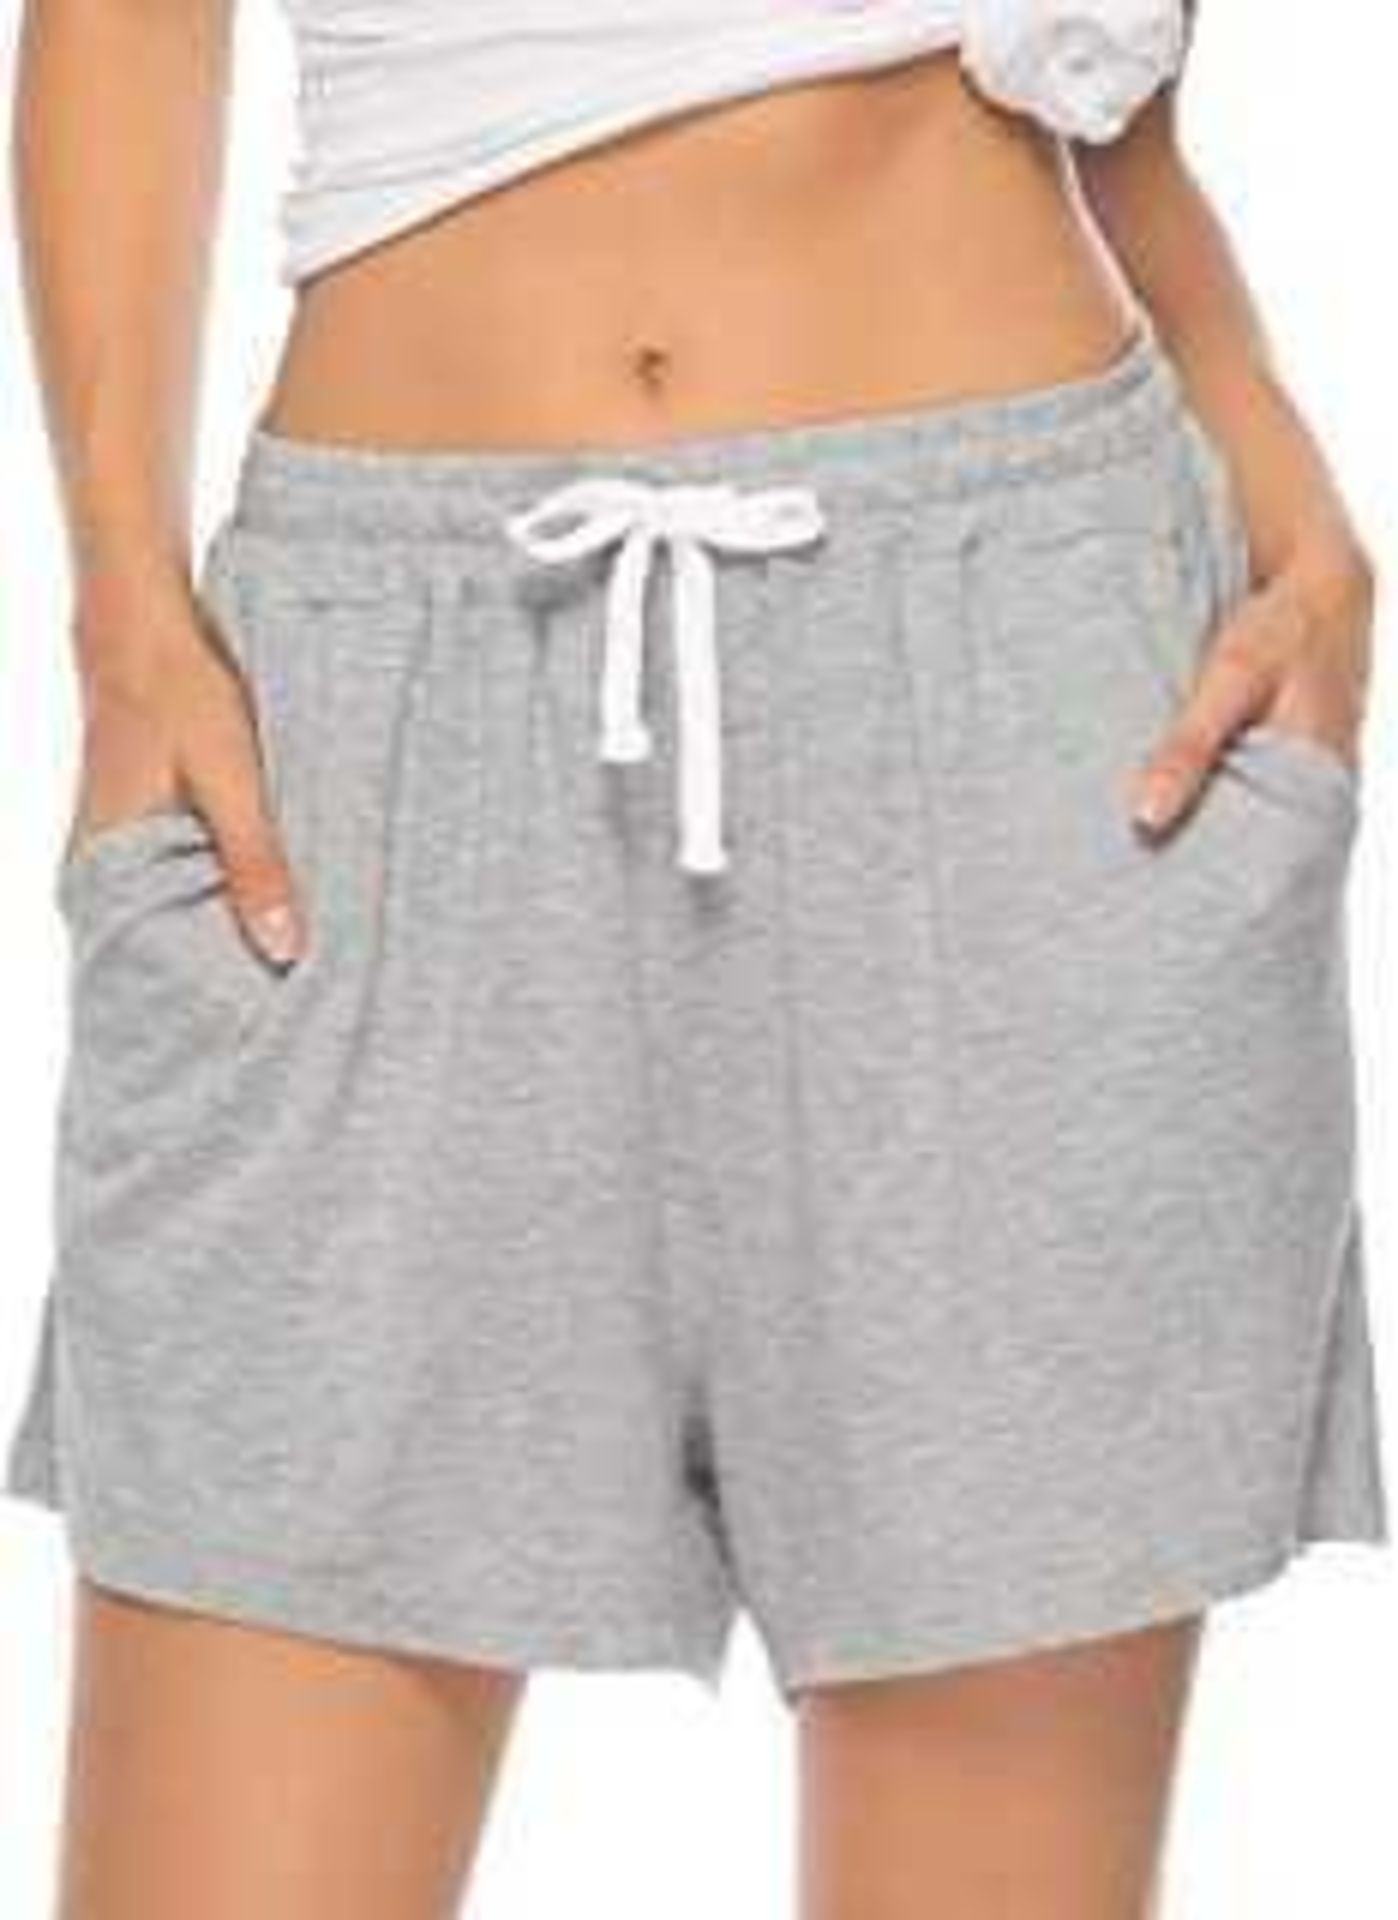 (Jb) RRP £530 Lot To Contain 53 Brand New Unpackaged Alfaz Womens Pajama shorts In Assorted Sizes An